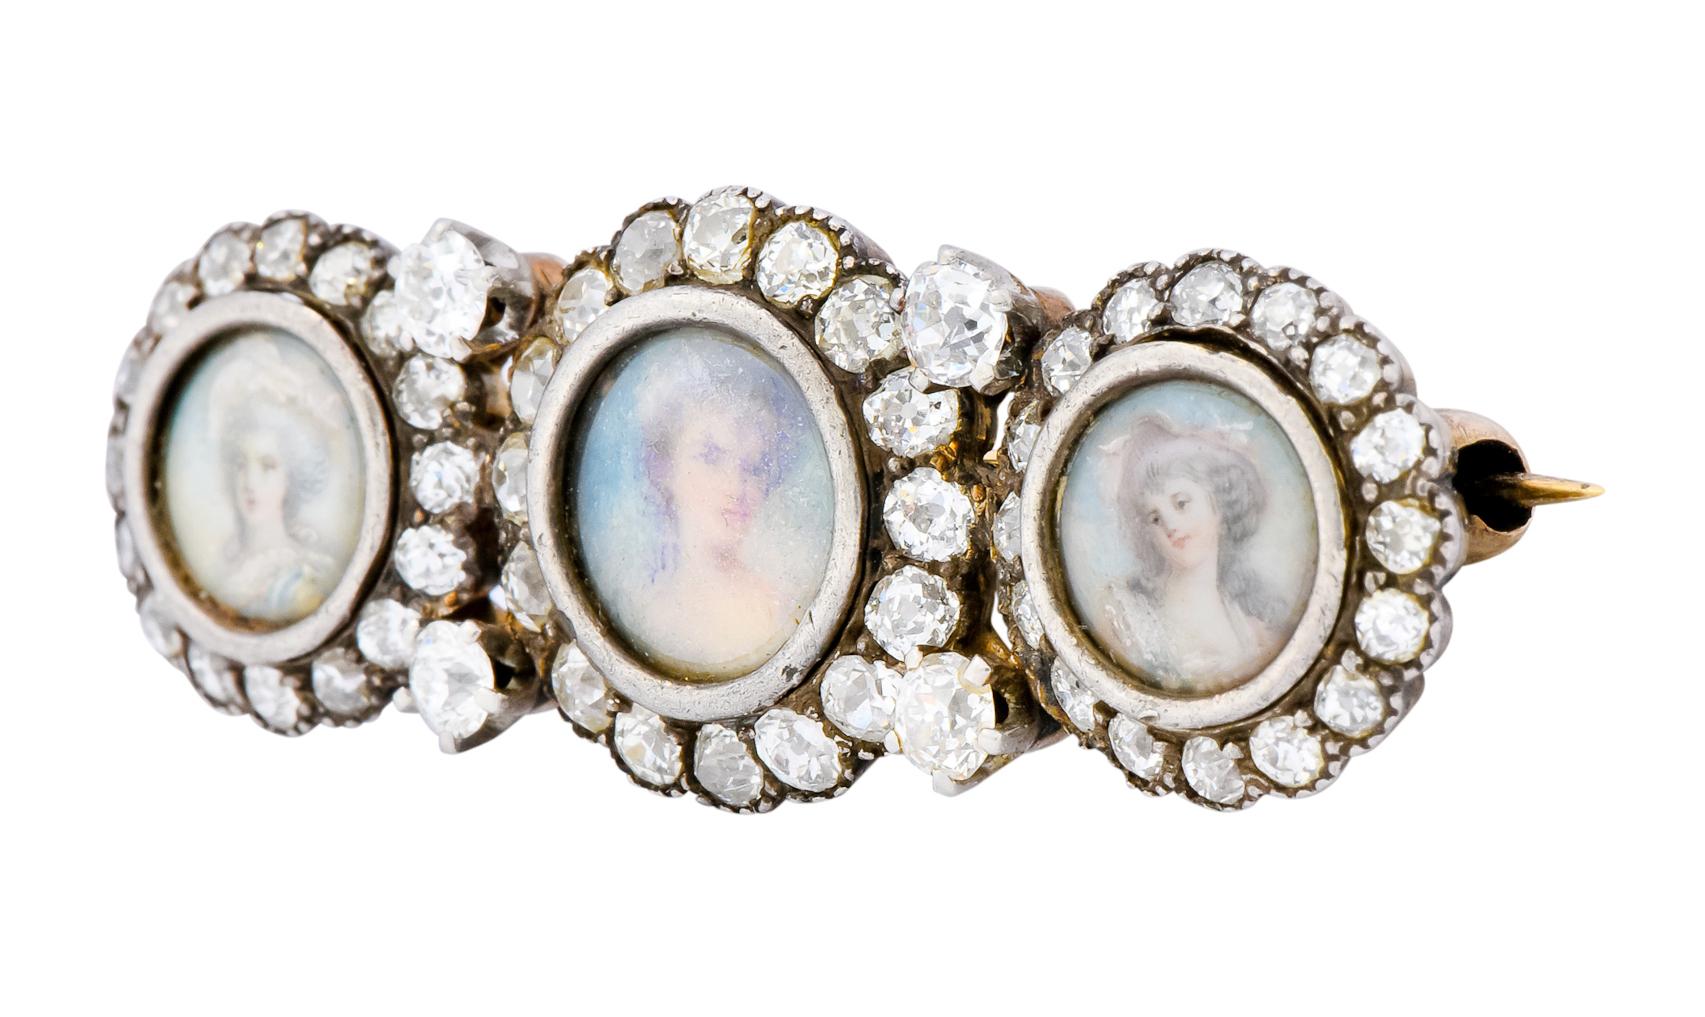 Centering three glass covered, hand painted portraits of women

One with grey curls, a fancy hat, and a blue dress; another with blonde updo and exposed shoulders; and one with large grey curls and white floral Victorian bonnet, all against a blue